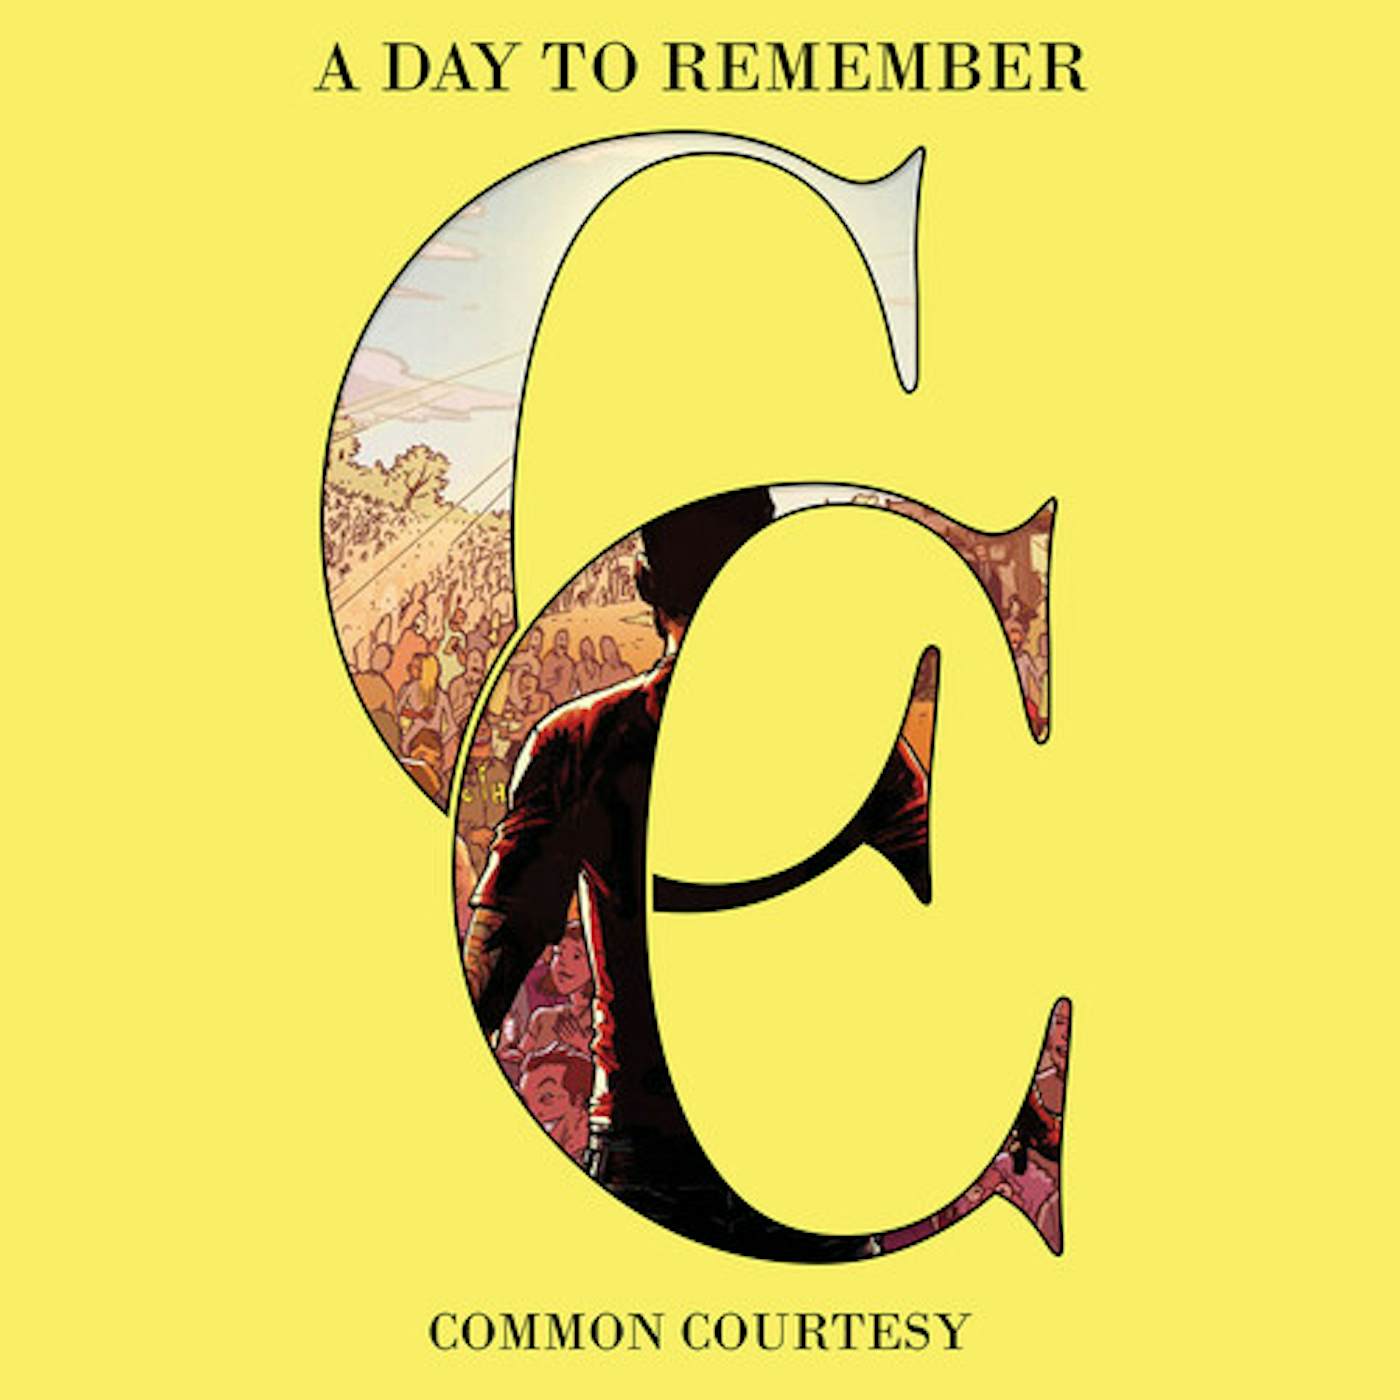 A Day To Remember Common Courtesy (Lemon & Milky Clear) Vinyl Record